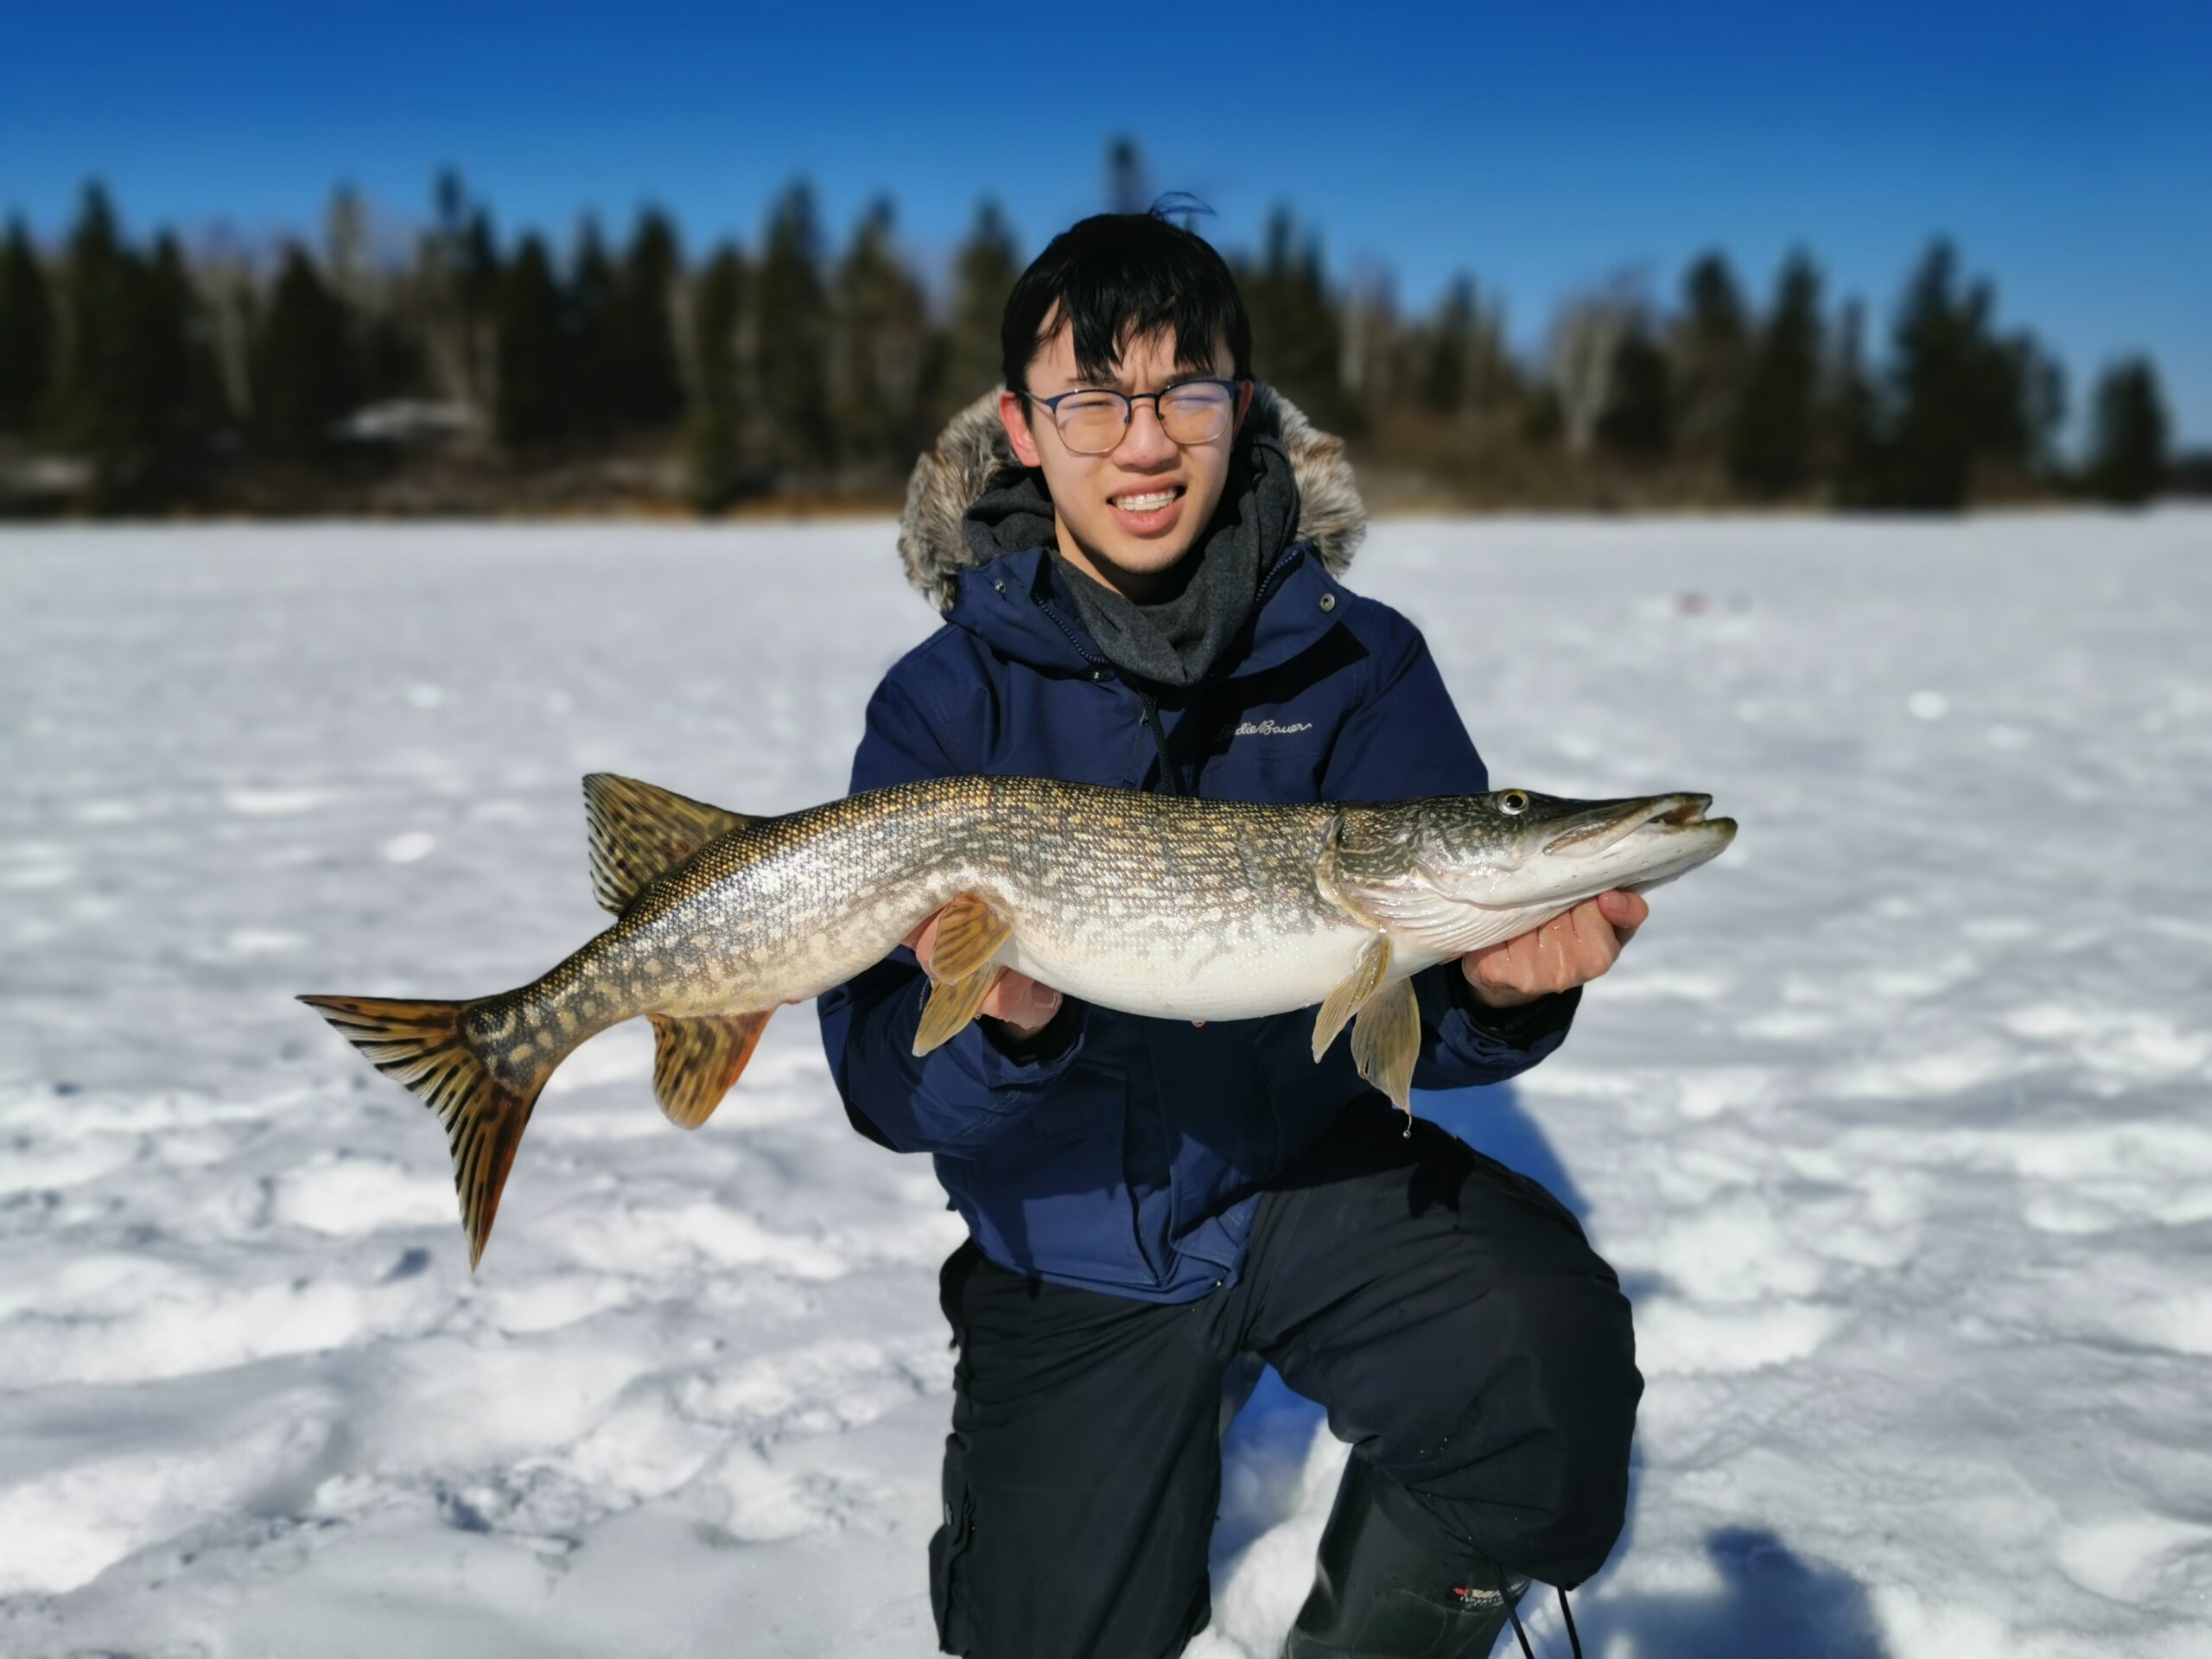 Tip Up Ice Fishing Pike - Petrowske's a northern Minnesota guide